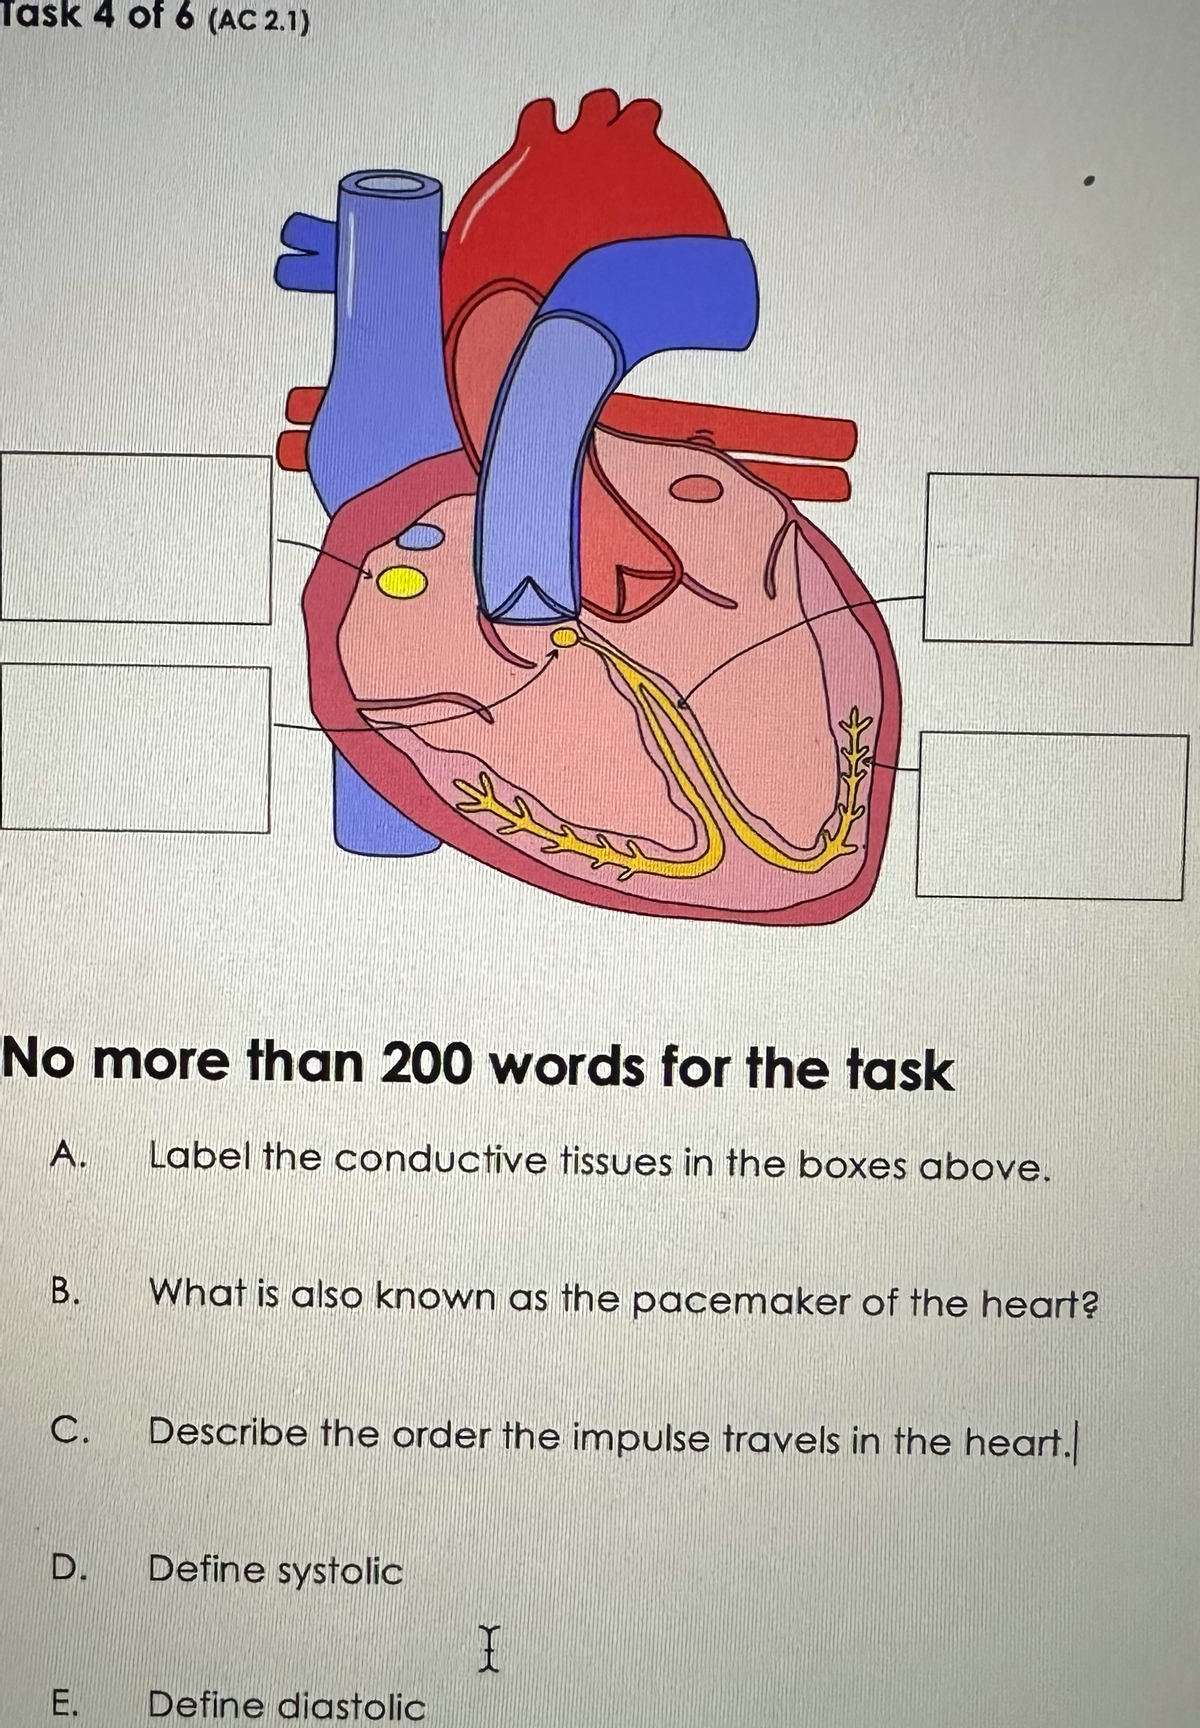 Task 4 of 6 (AC 2.1)
No more than 200 words for the task
A. Label the conductive tissues in the boxes above.
B. What is also known as the pacemaker of the heart?
Ü
C.
Describe the order the impulse travels in the heart.
D. Define systolic
E. Define diastolic
I